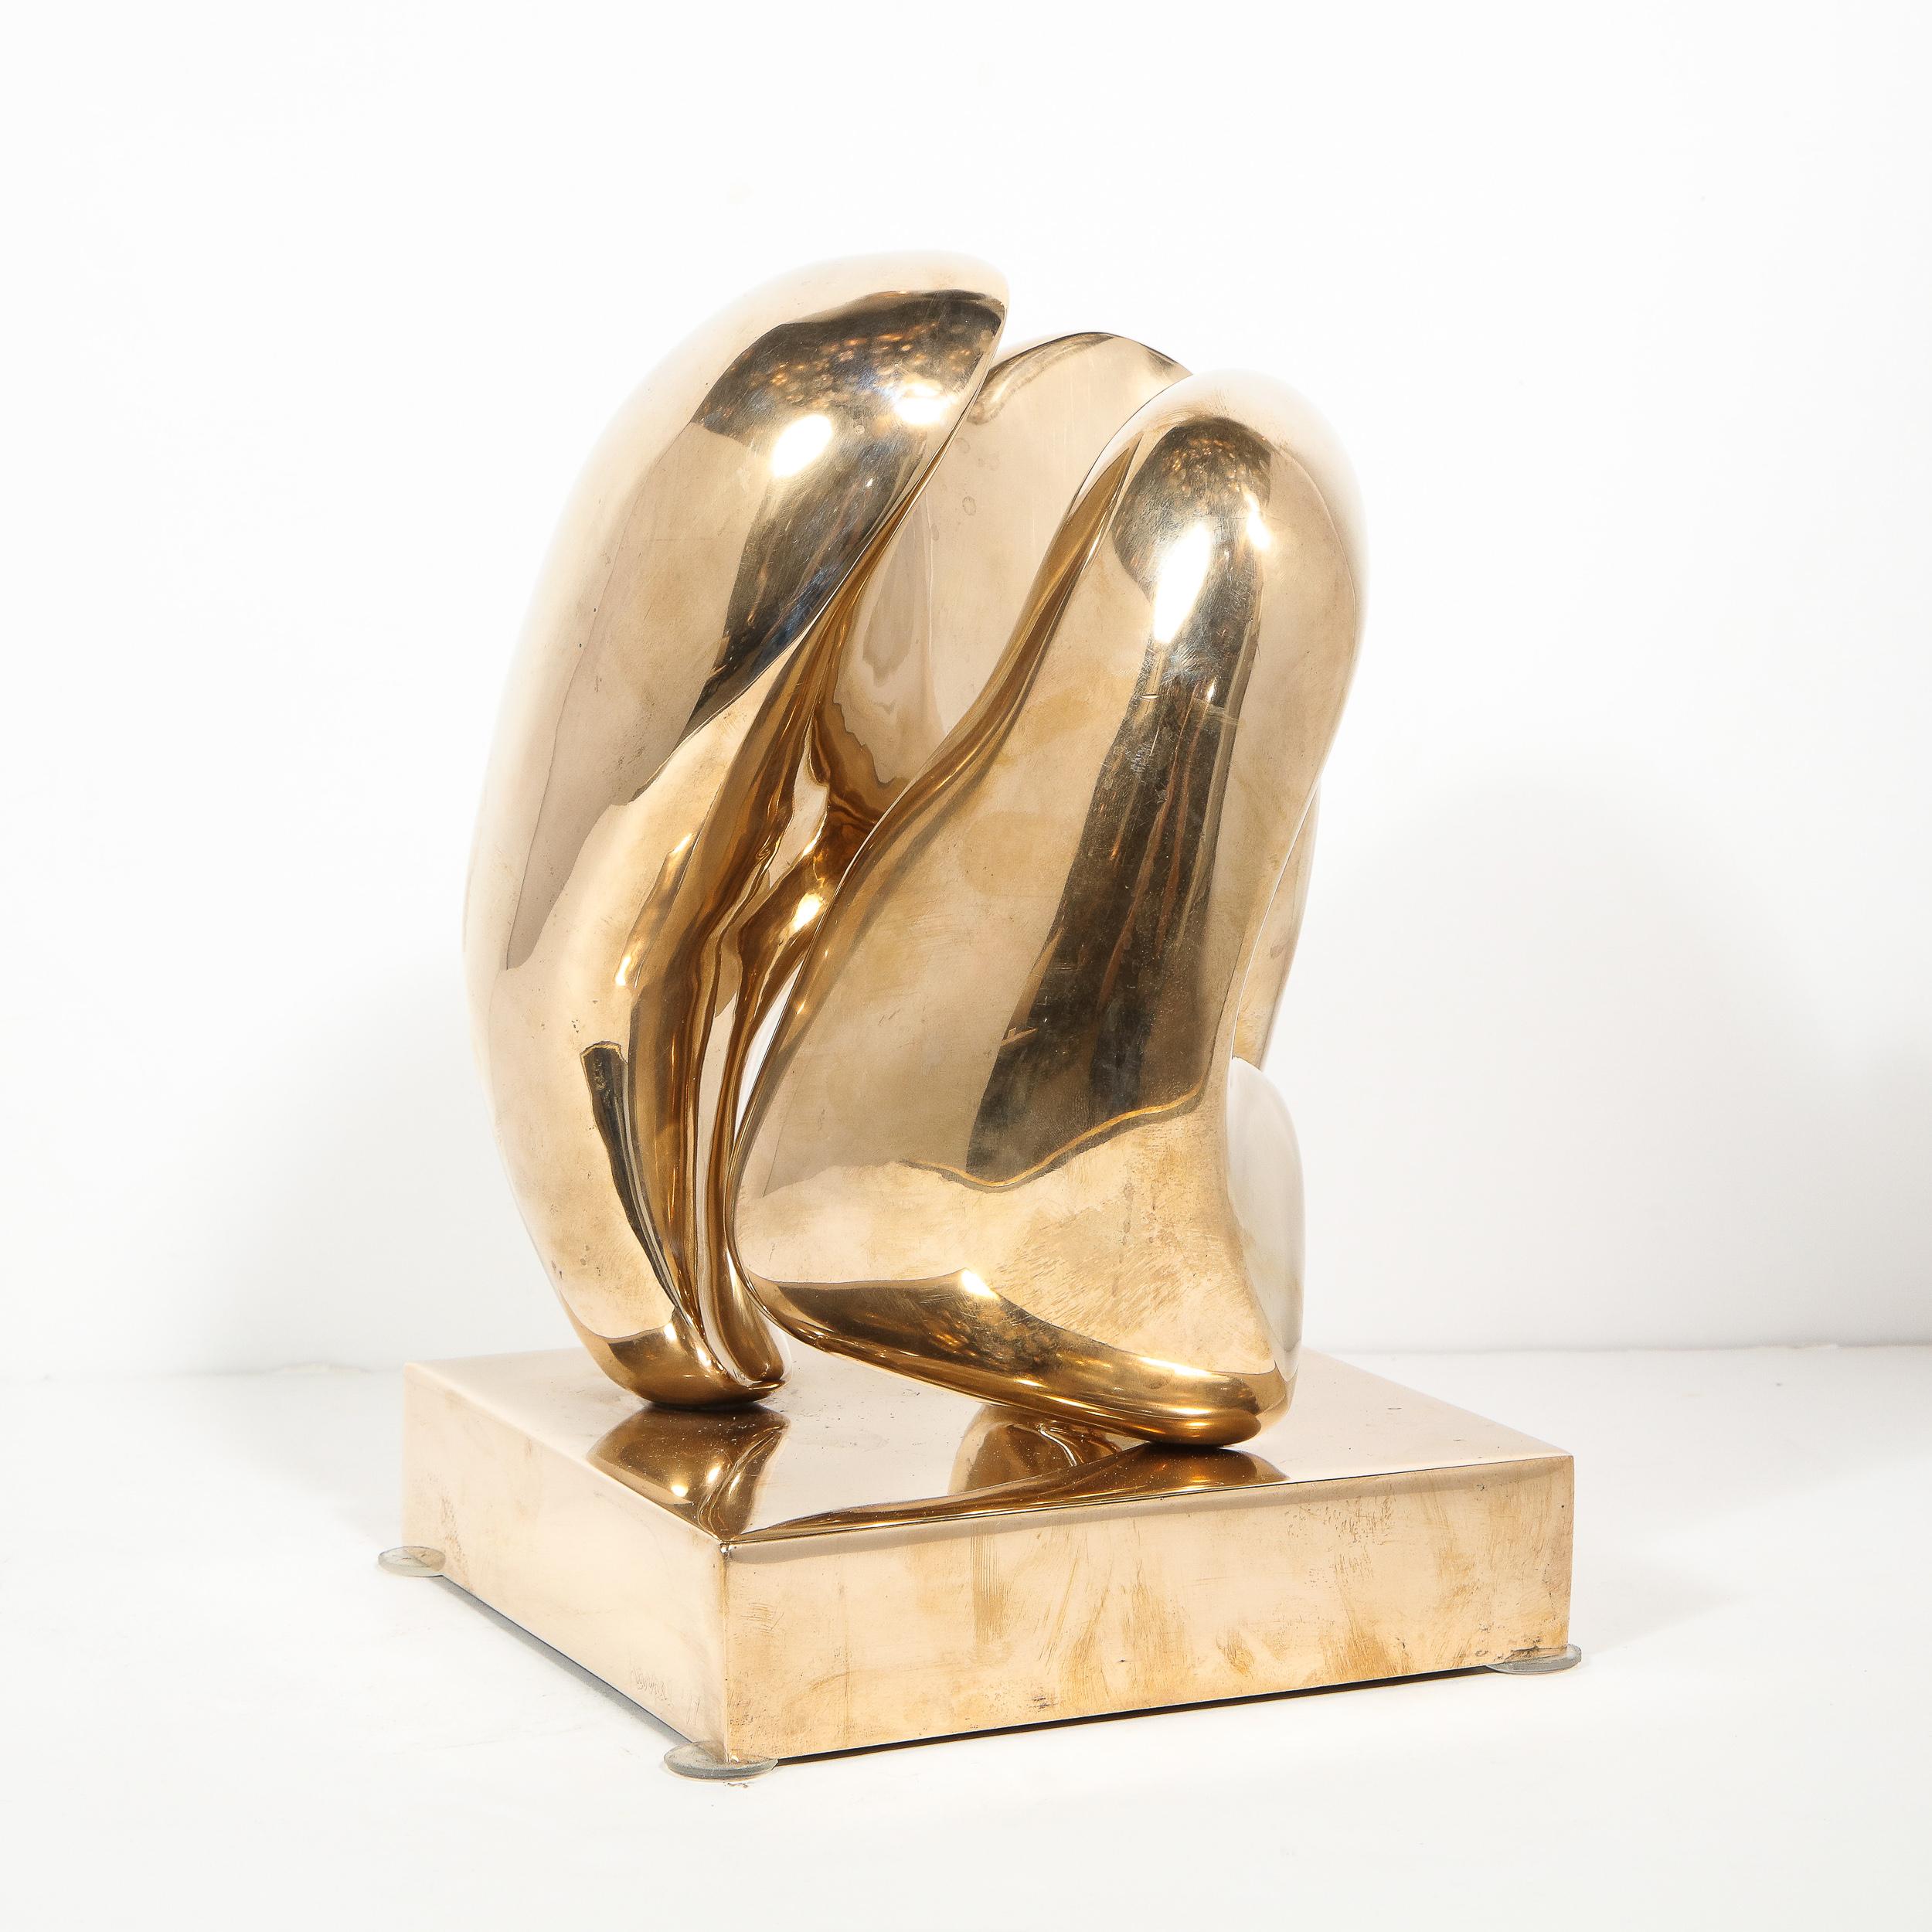 This stunning Mid-Century Modern sculpture was realized by the esteemed maker Karpel in the United States, as part of a small edition of seven. Suggestive of sculptures by Henry Moore and Jean Arp, the sculpture offers two amorphic forms- suggestive